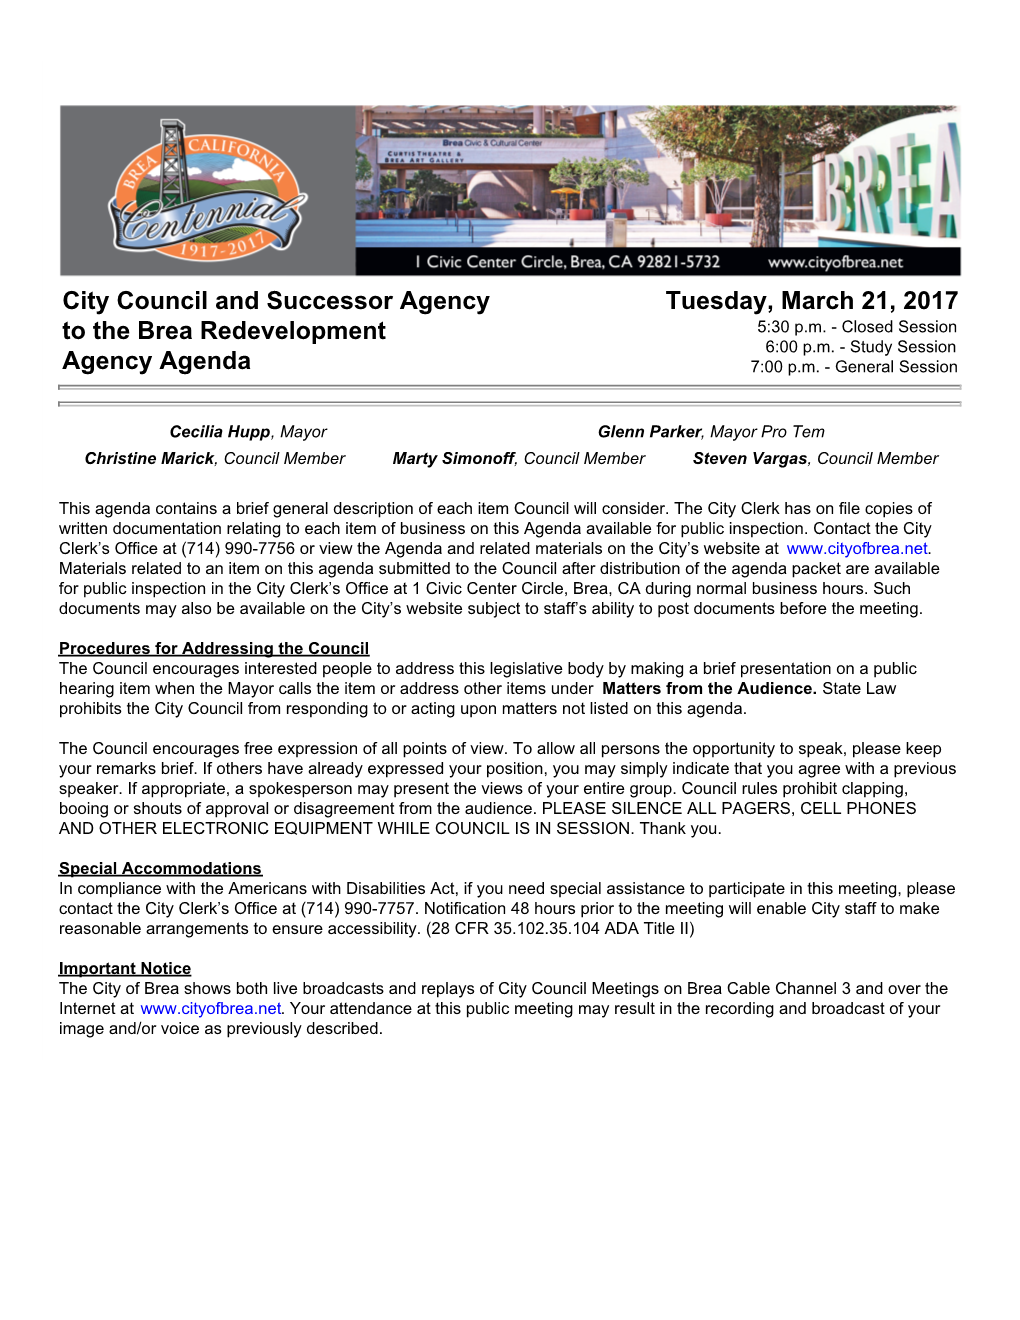 City Council and Successor Agency to the Brea Redevelopment Agency Agenda Tuesday, March 21, 2017